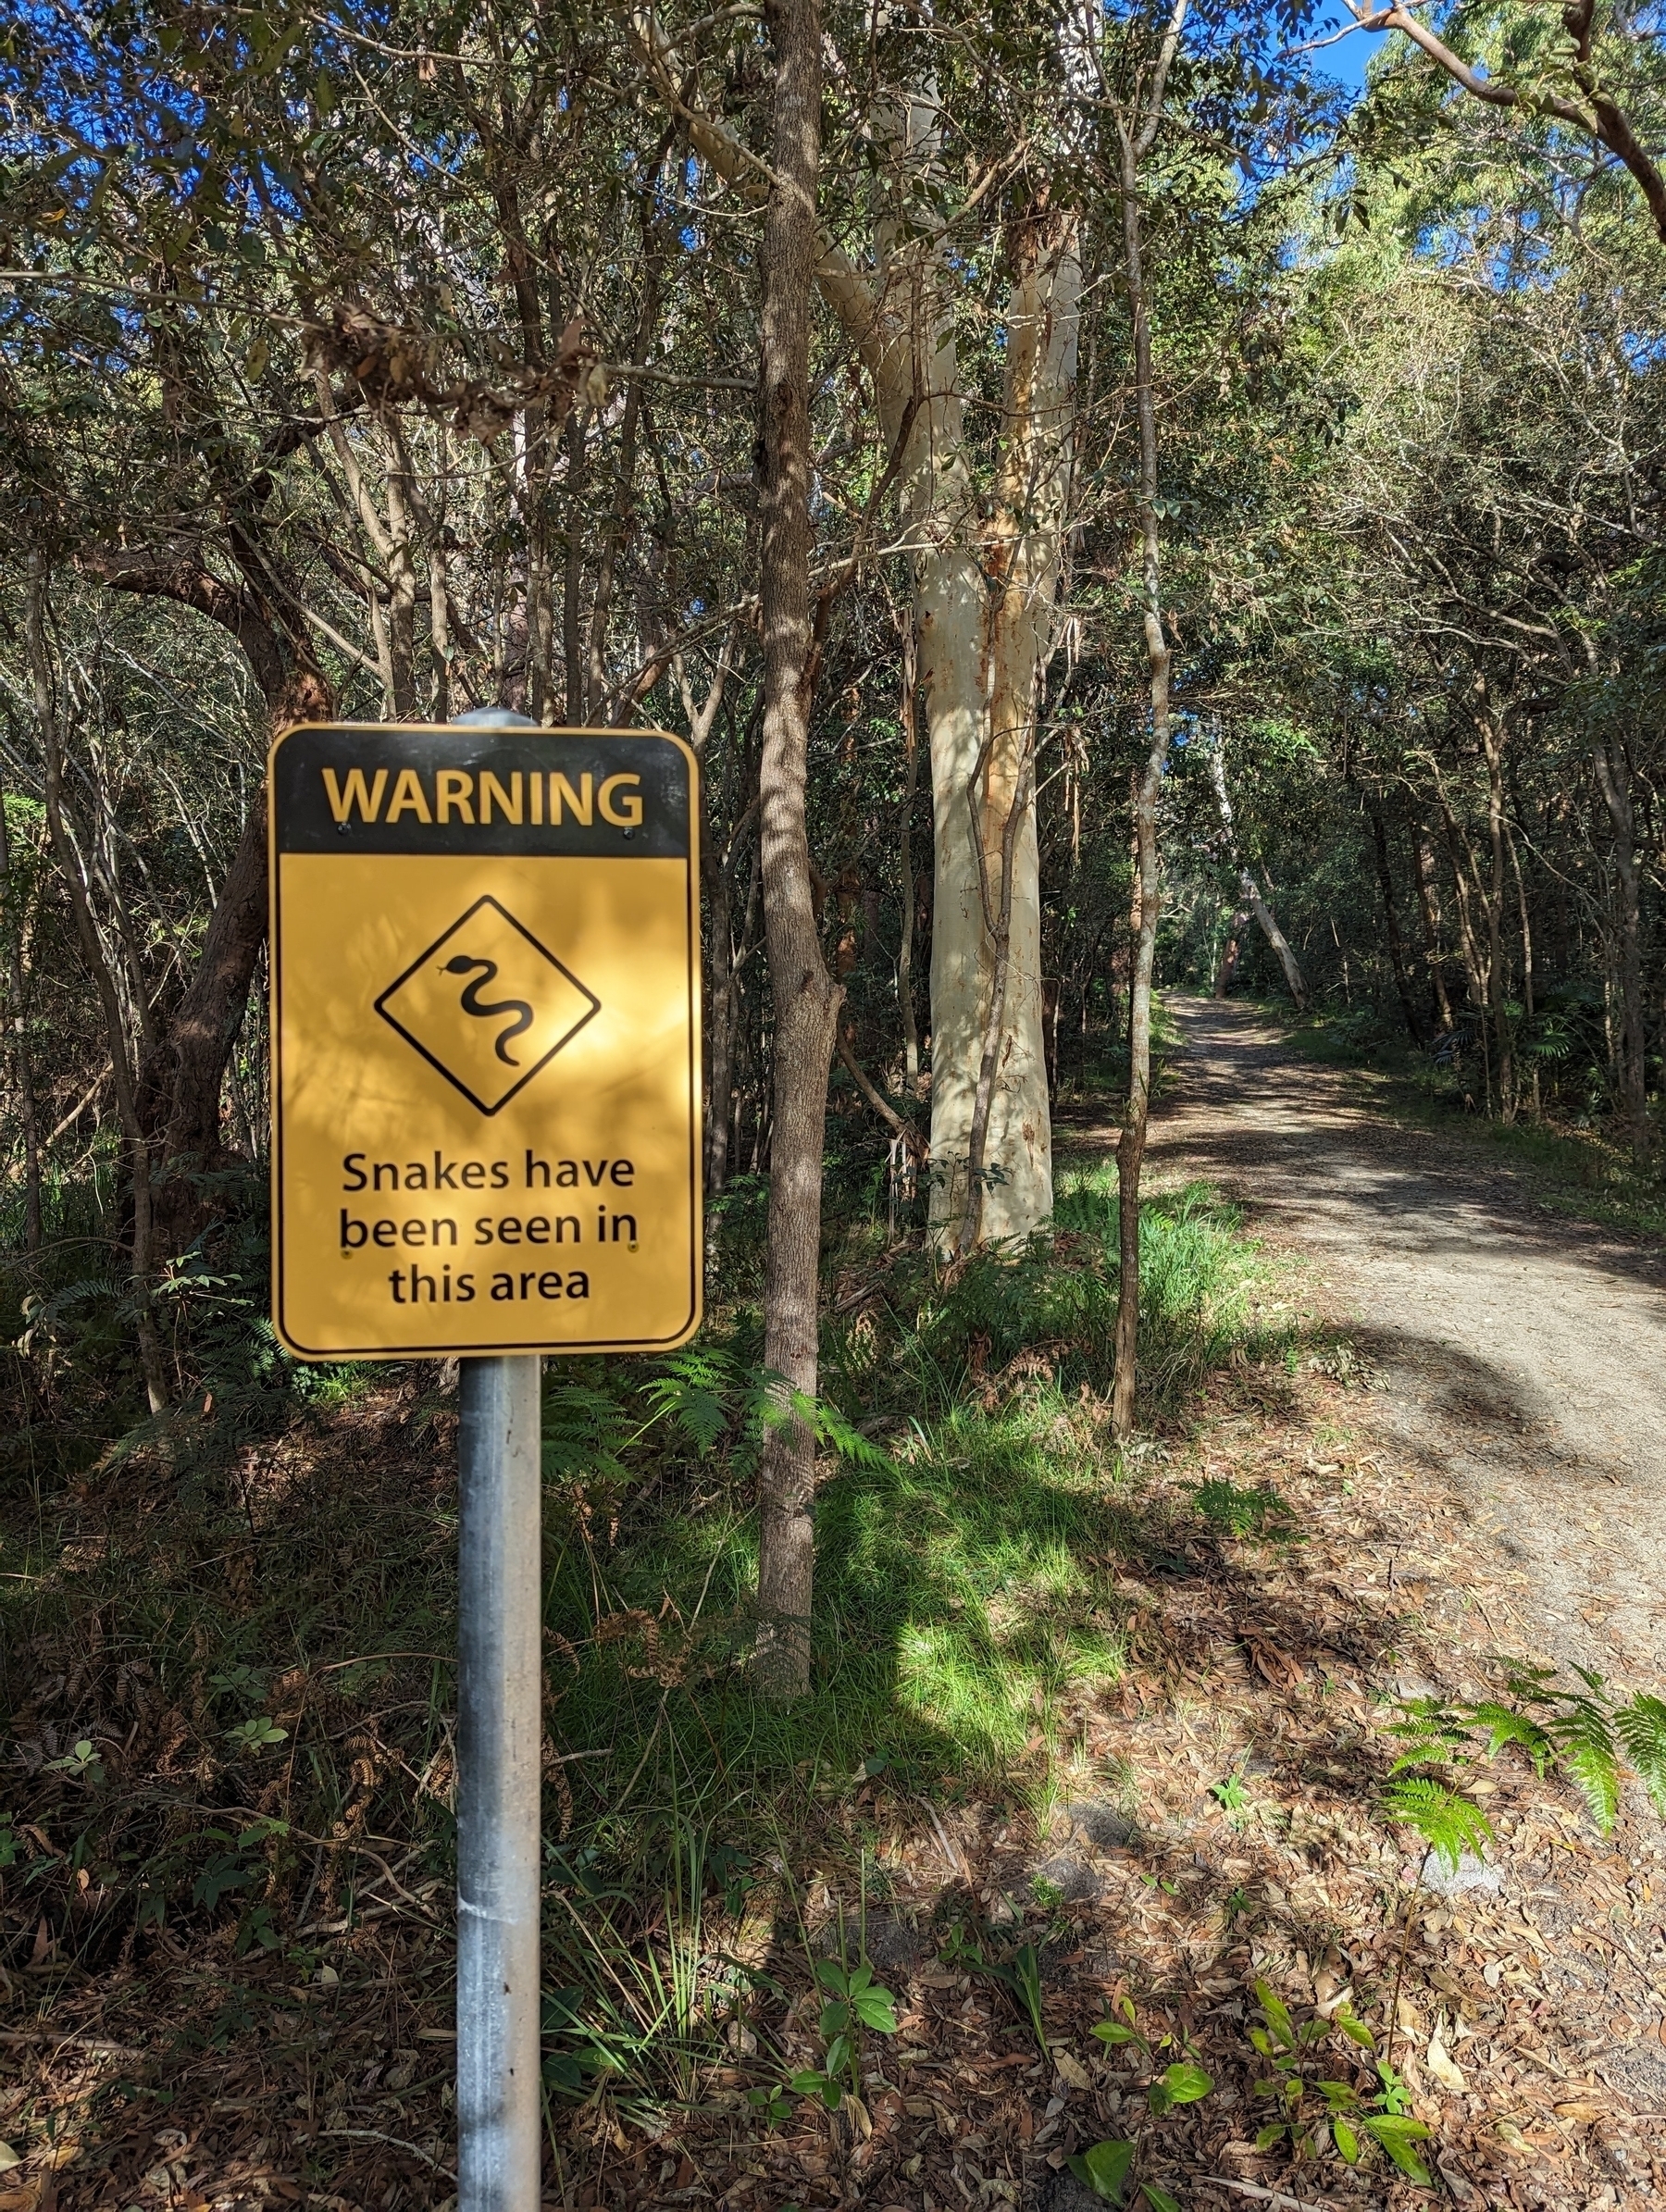 A fire trail in the Australian bush. In the foreground, a yellow sign warns that snakes have been seen in this area.